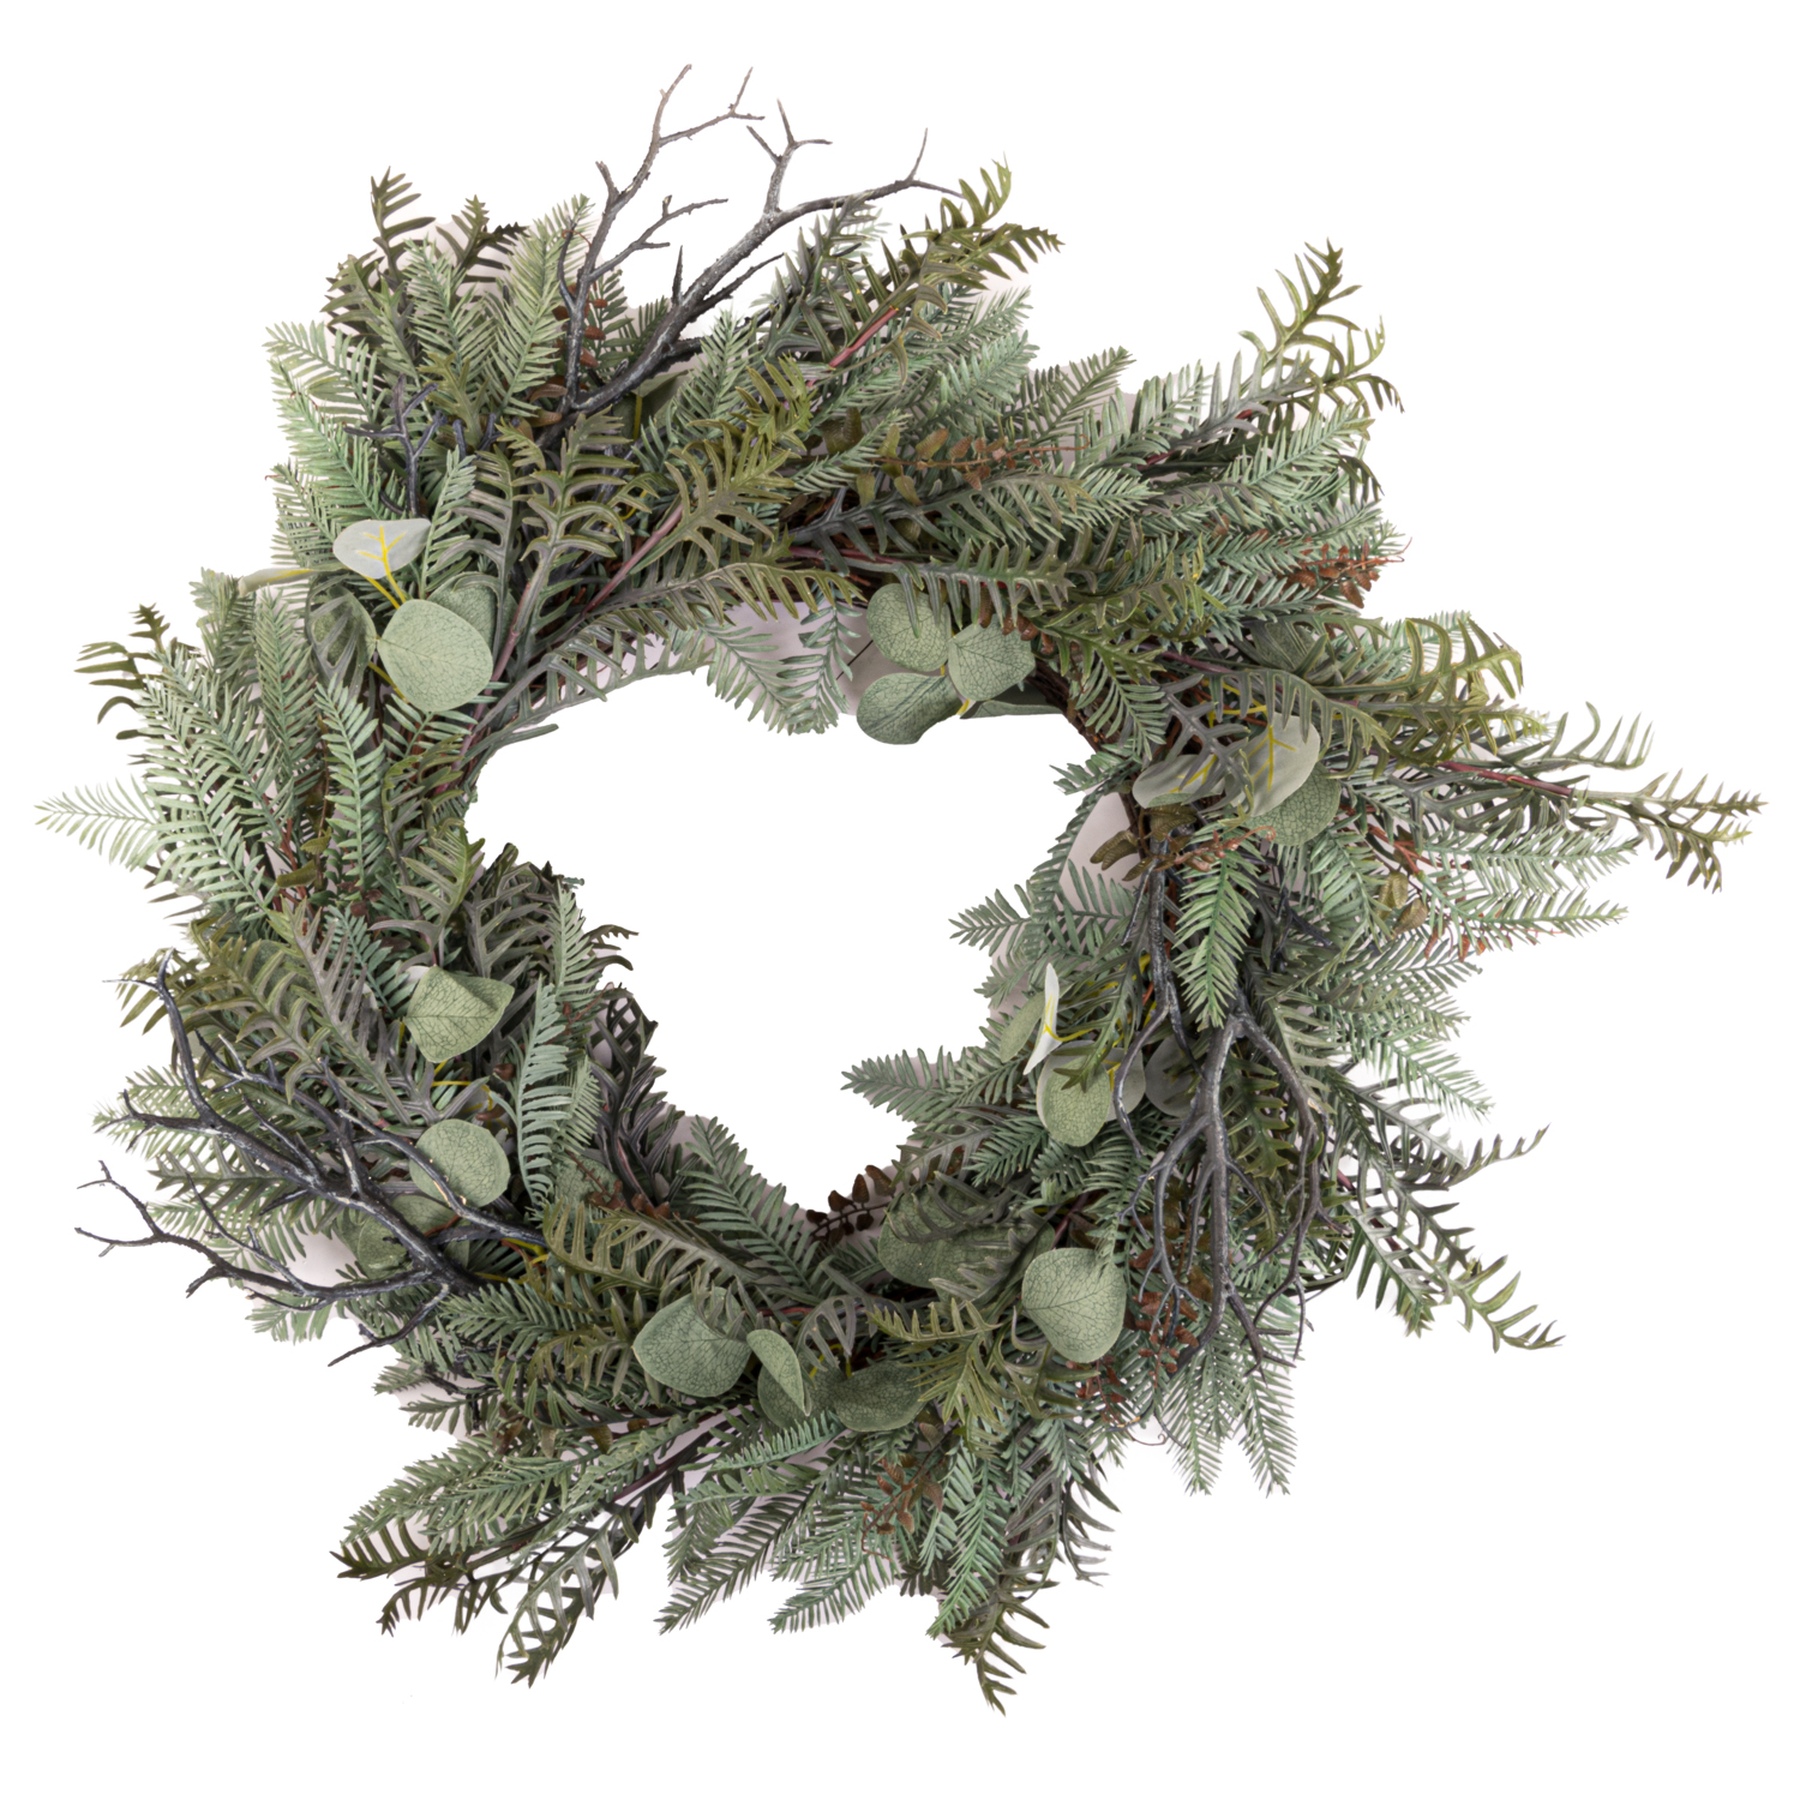 Winter Wreath With Eucalyptus And Fern - Image 1